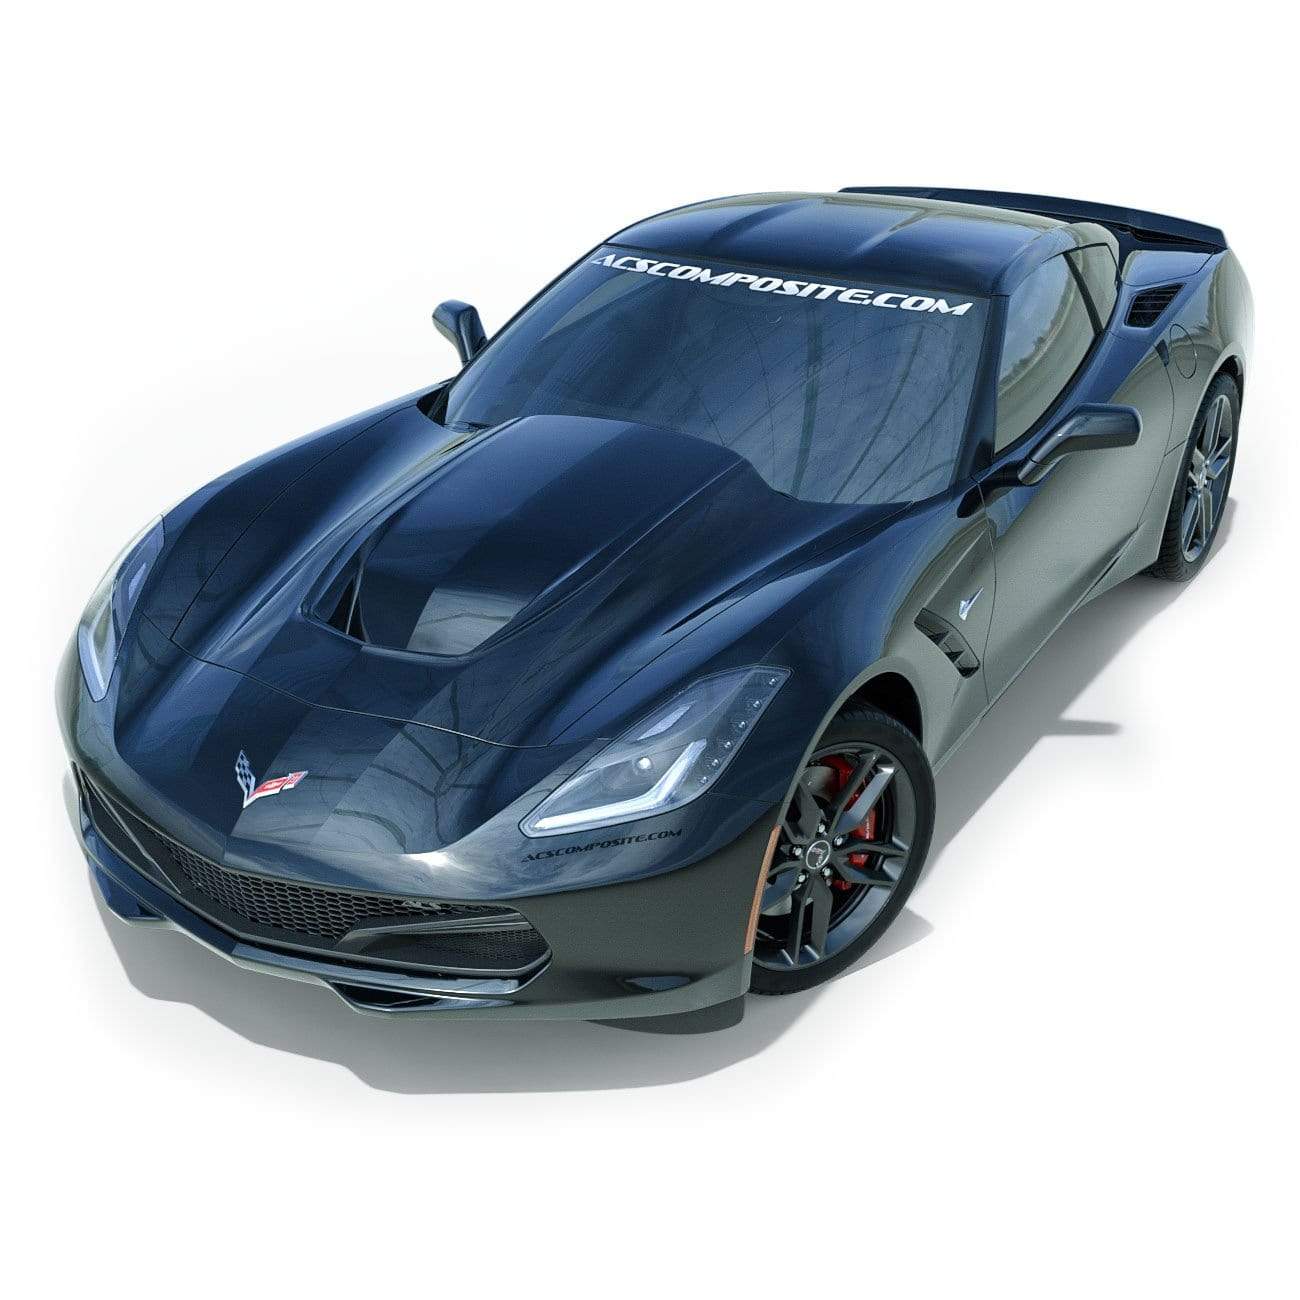 ACS Composite Zero7 Extractor FRP Hood for C7 Corvette (45-4-009) - High-quality aftermarket hood with true waterfall extractor feature and black ABS plastic octagonal mesh grill insert.